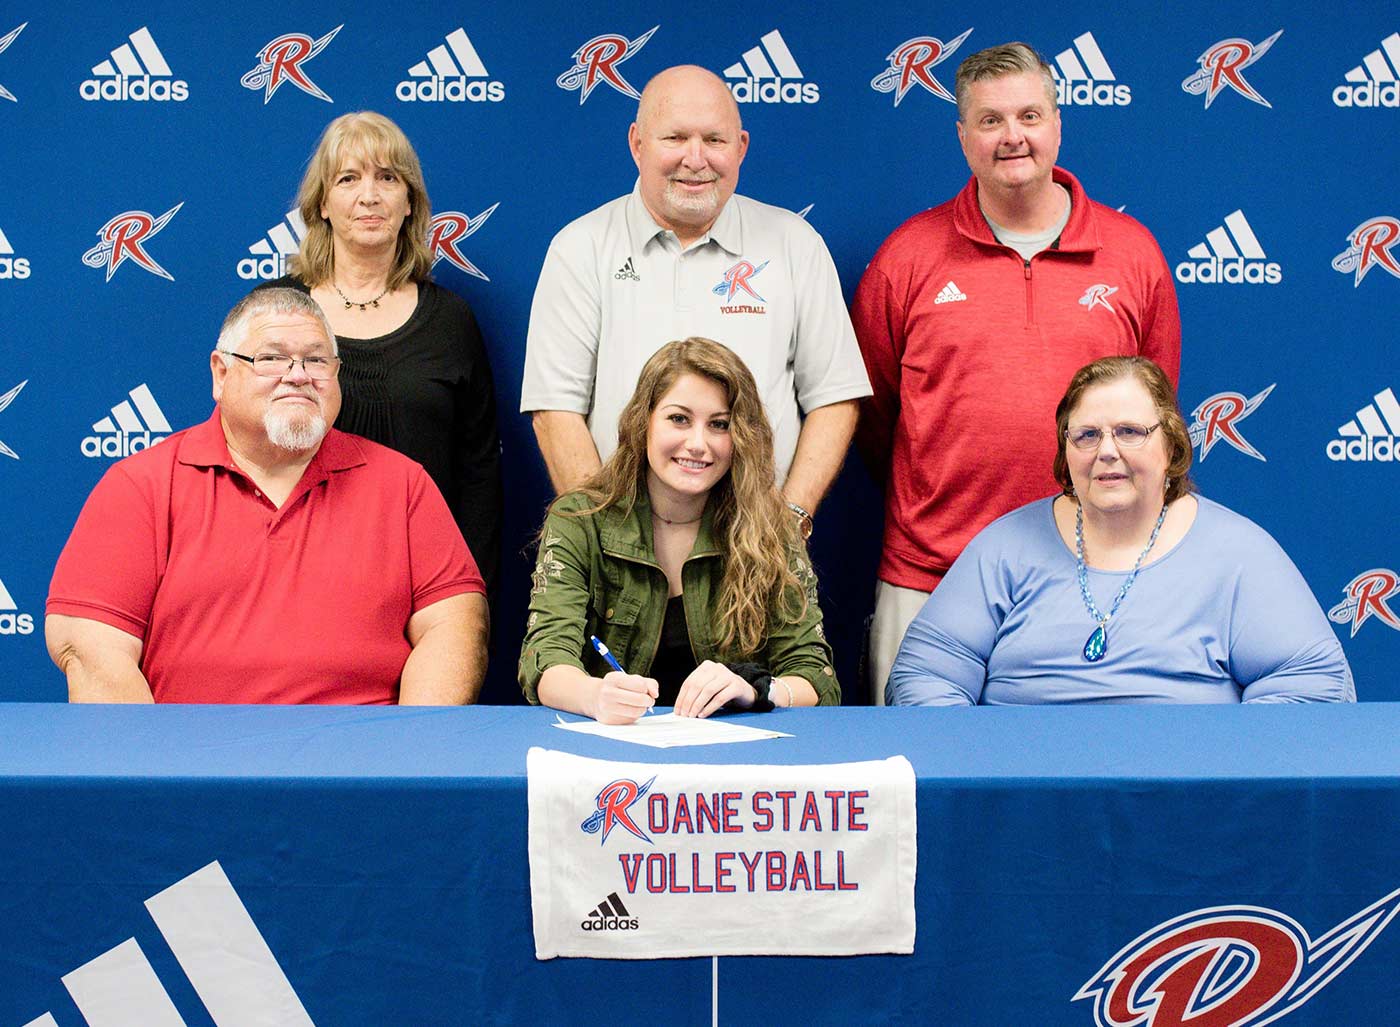 Haylee Rogers, seated, center, is the first athlete to sign with Roane State’s new women’s volleyball team and is flanked by her parents, Robert and Abbie Rogers. Standing from left: Haylee’s aunt, Teri Williams, Lady Raiders Head Volleyball Coach Steve Dallman and Roane State Athletics Assistant Scott Witt.